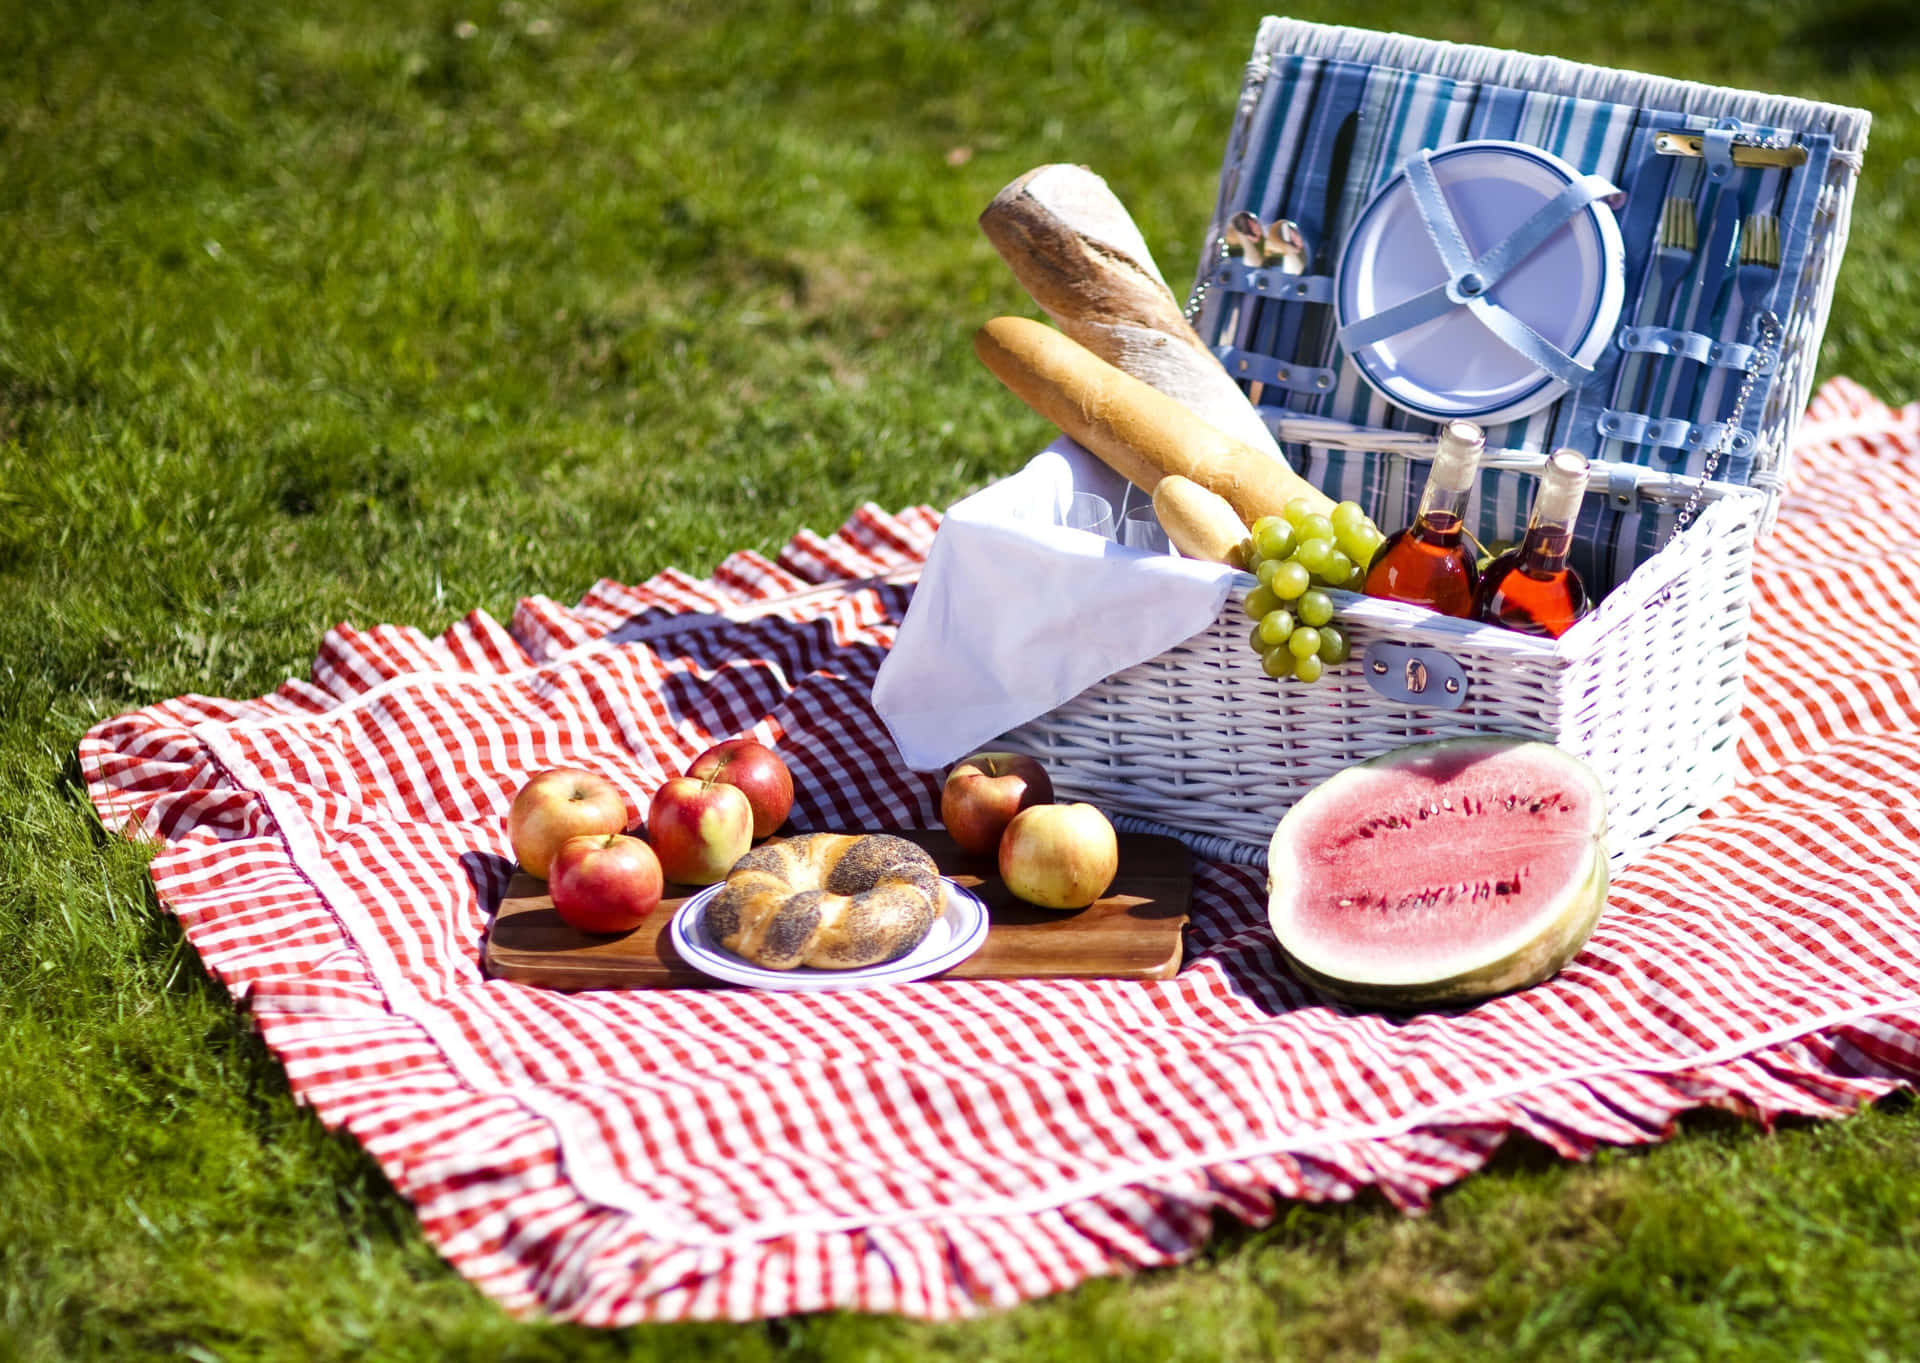 Caption: A Leisurely Afternoon Picnic By The River